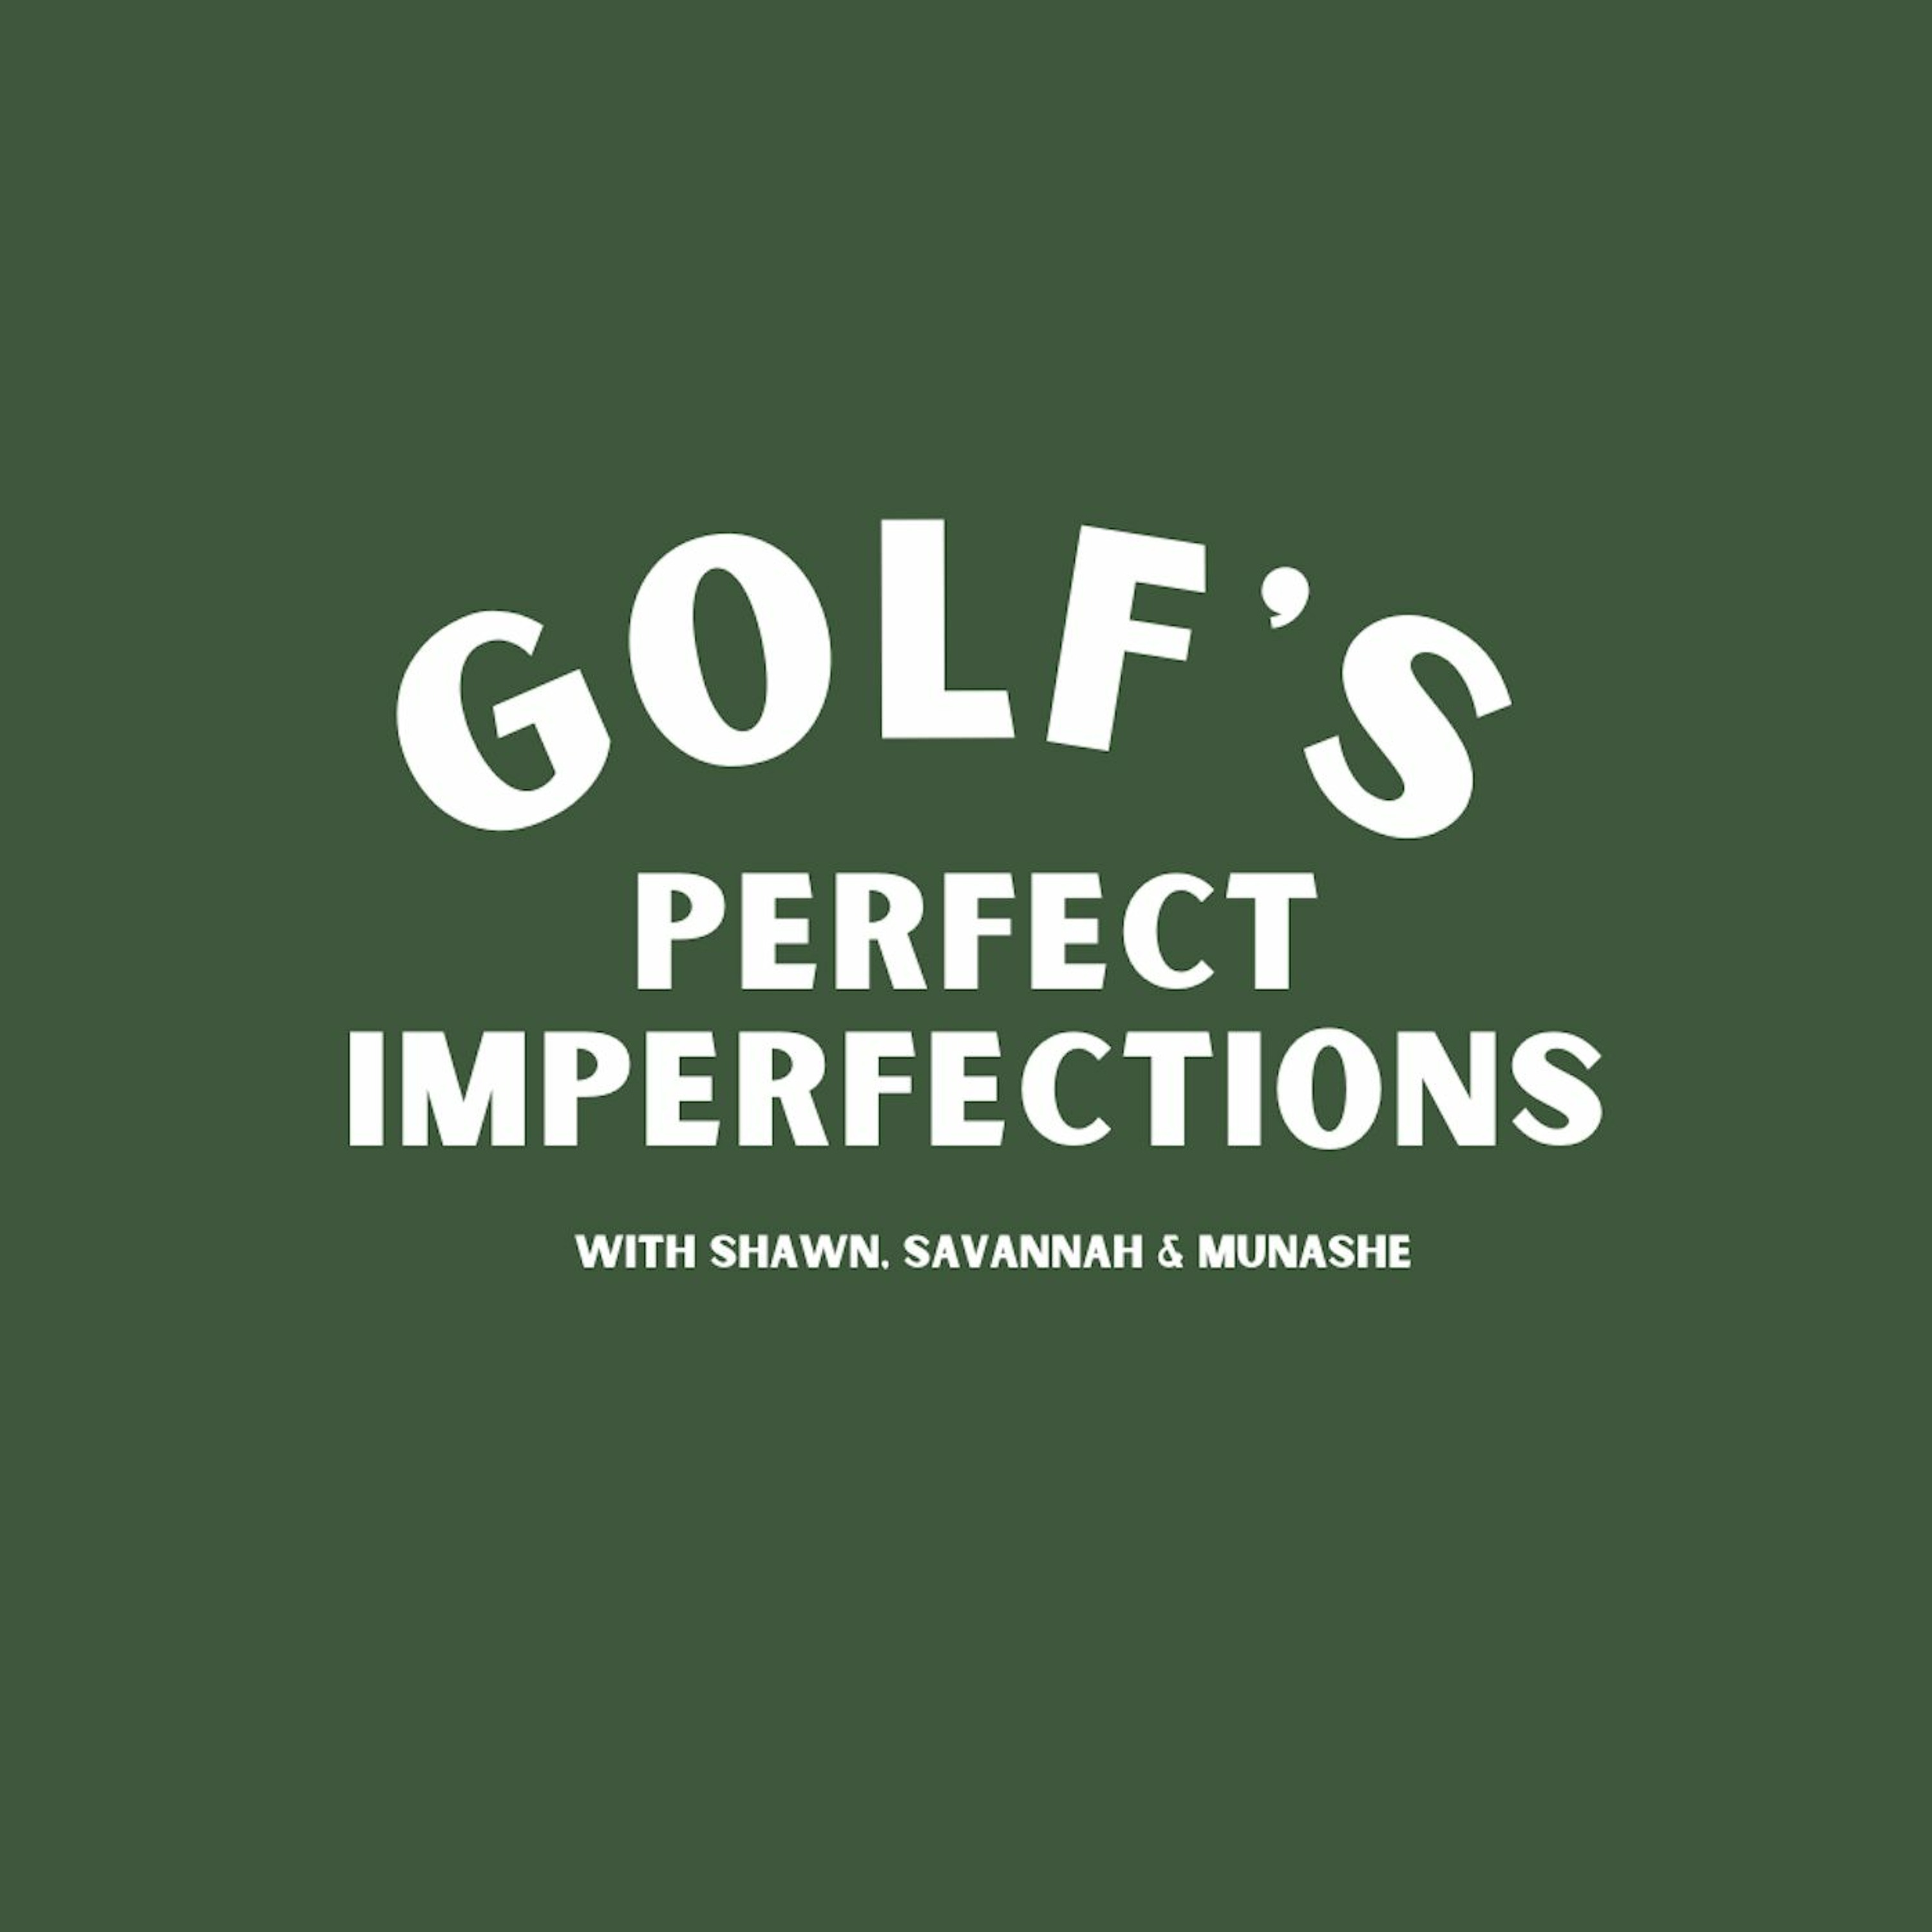 Golf's Perfect Imperfections: How to get the most out of your practice from your mind and body.